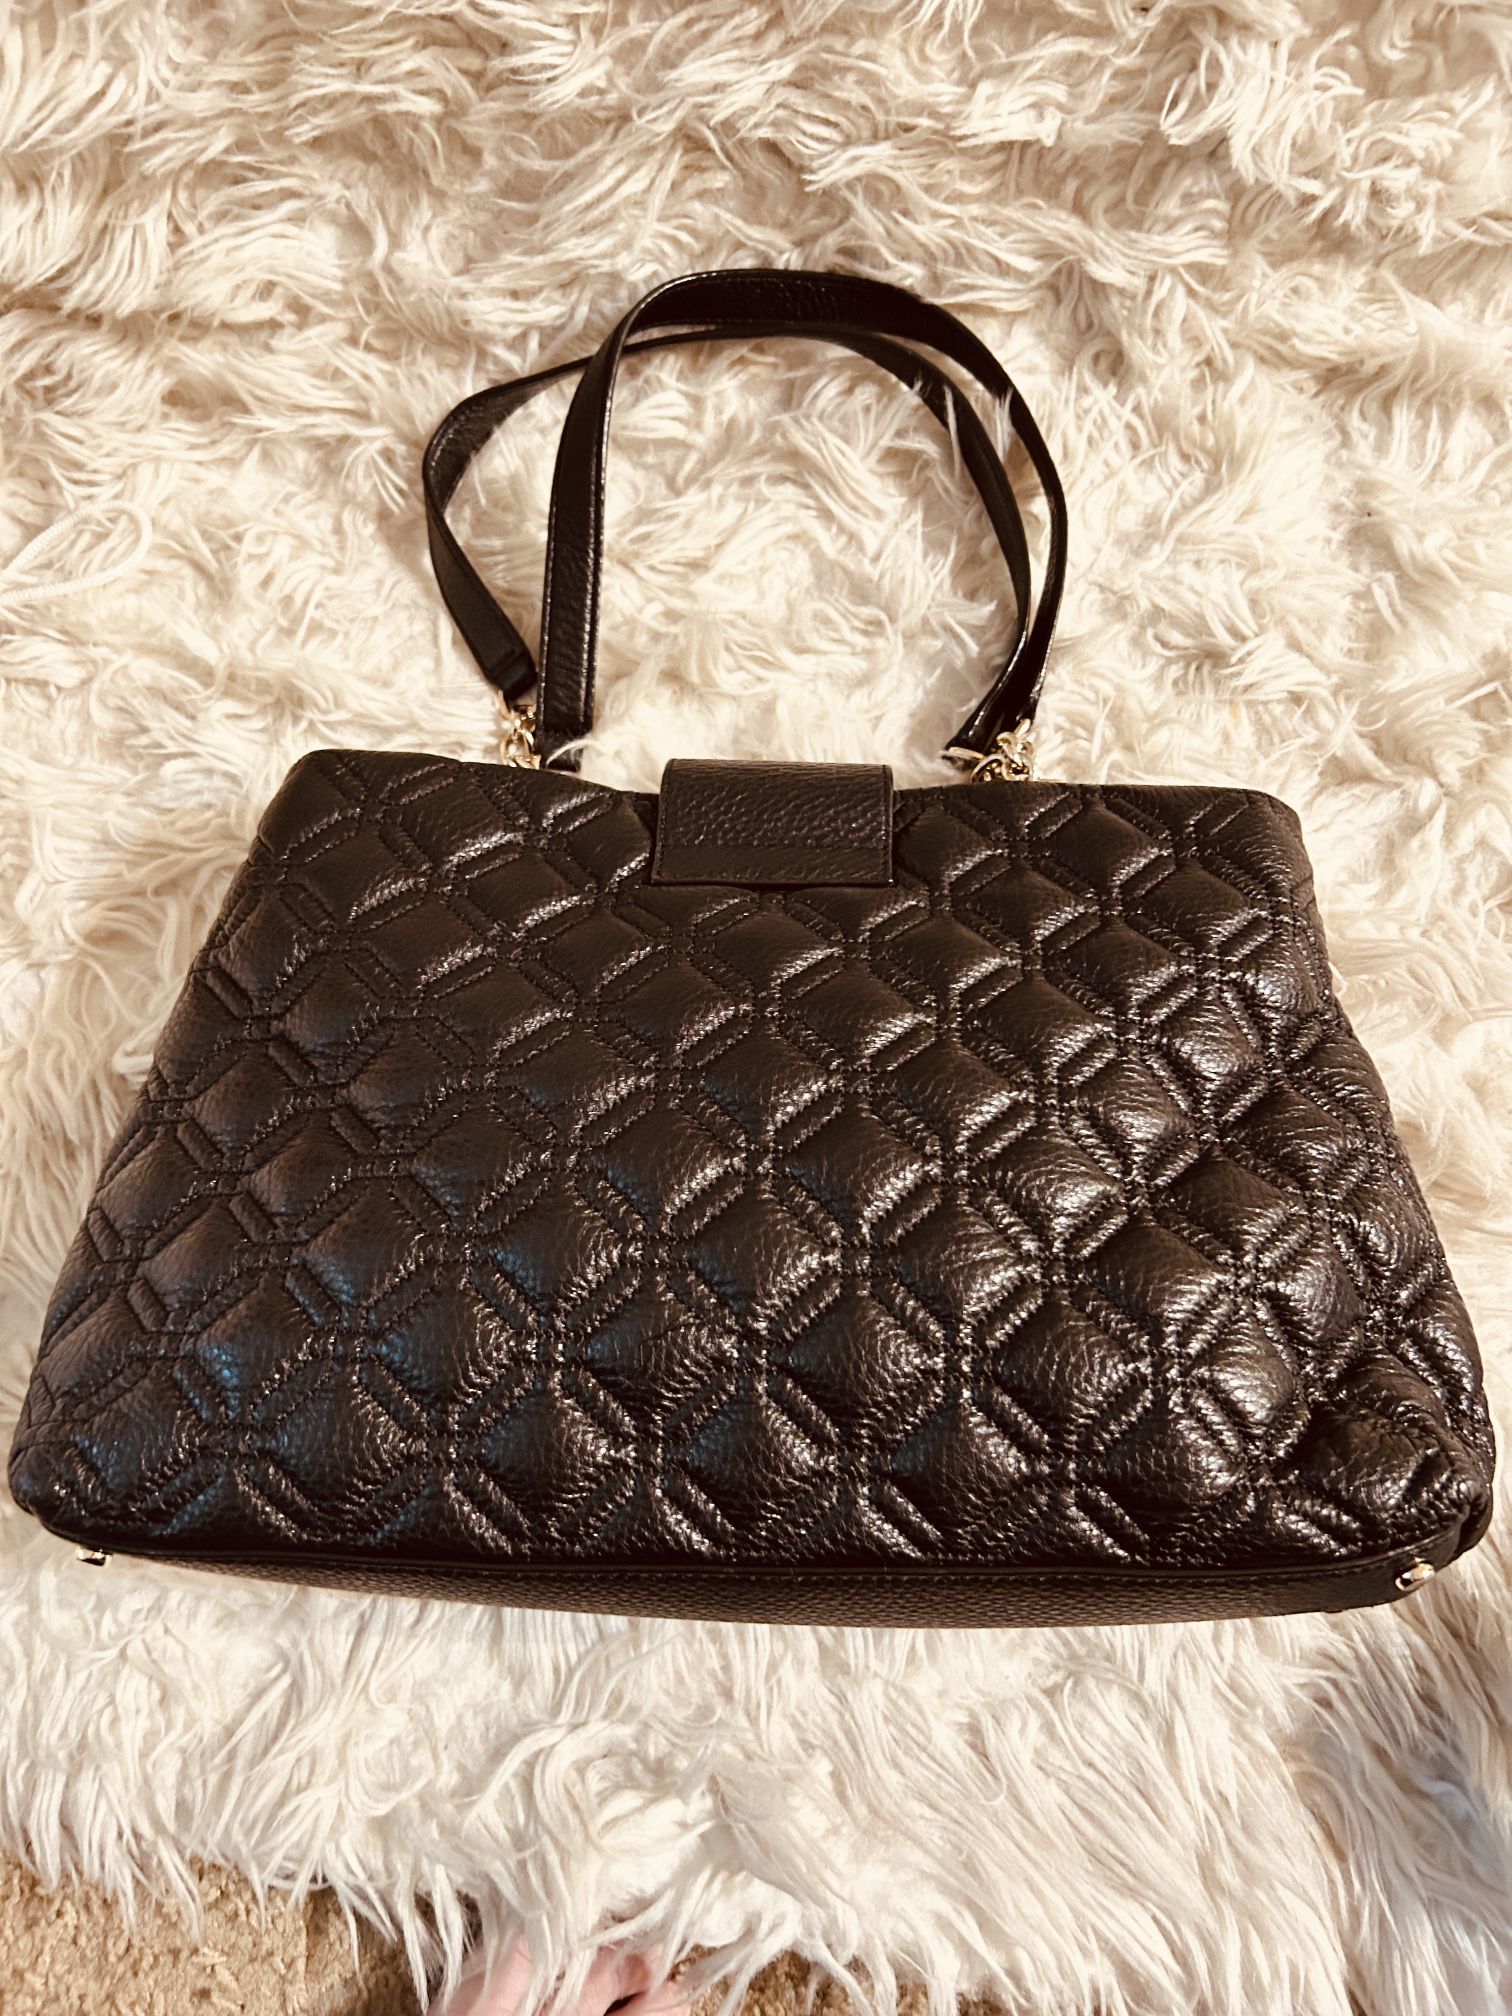 Kate Spade York quilted Handbag New Without Tags 